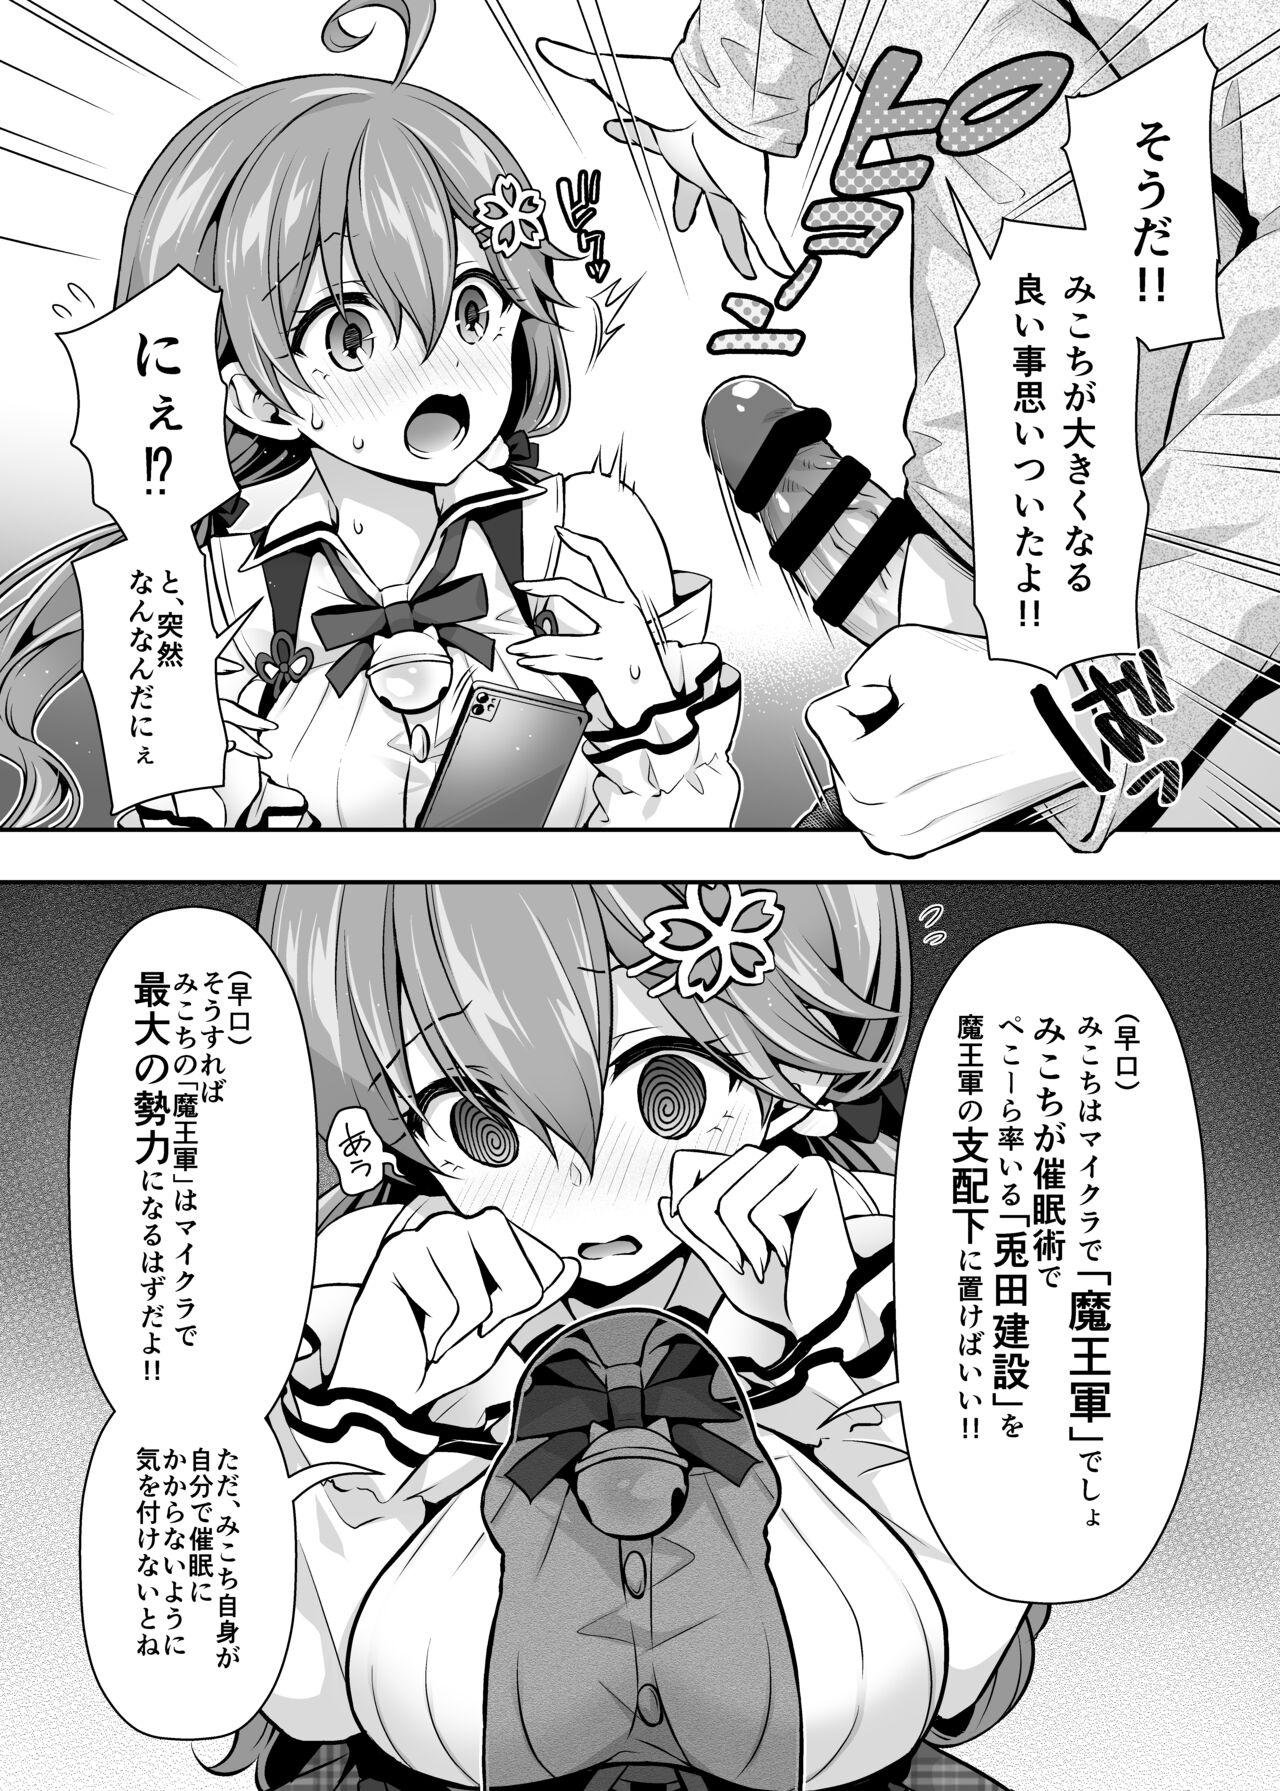 Home みこち催眠えっち本2 ～悪魔的所業編～ - Hololive Hungarian - Page 5